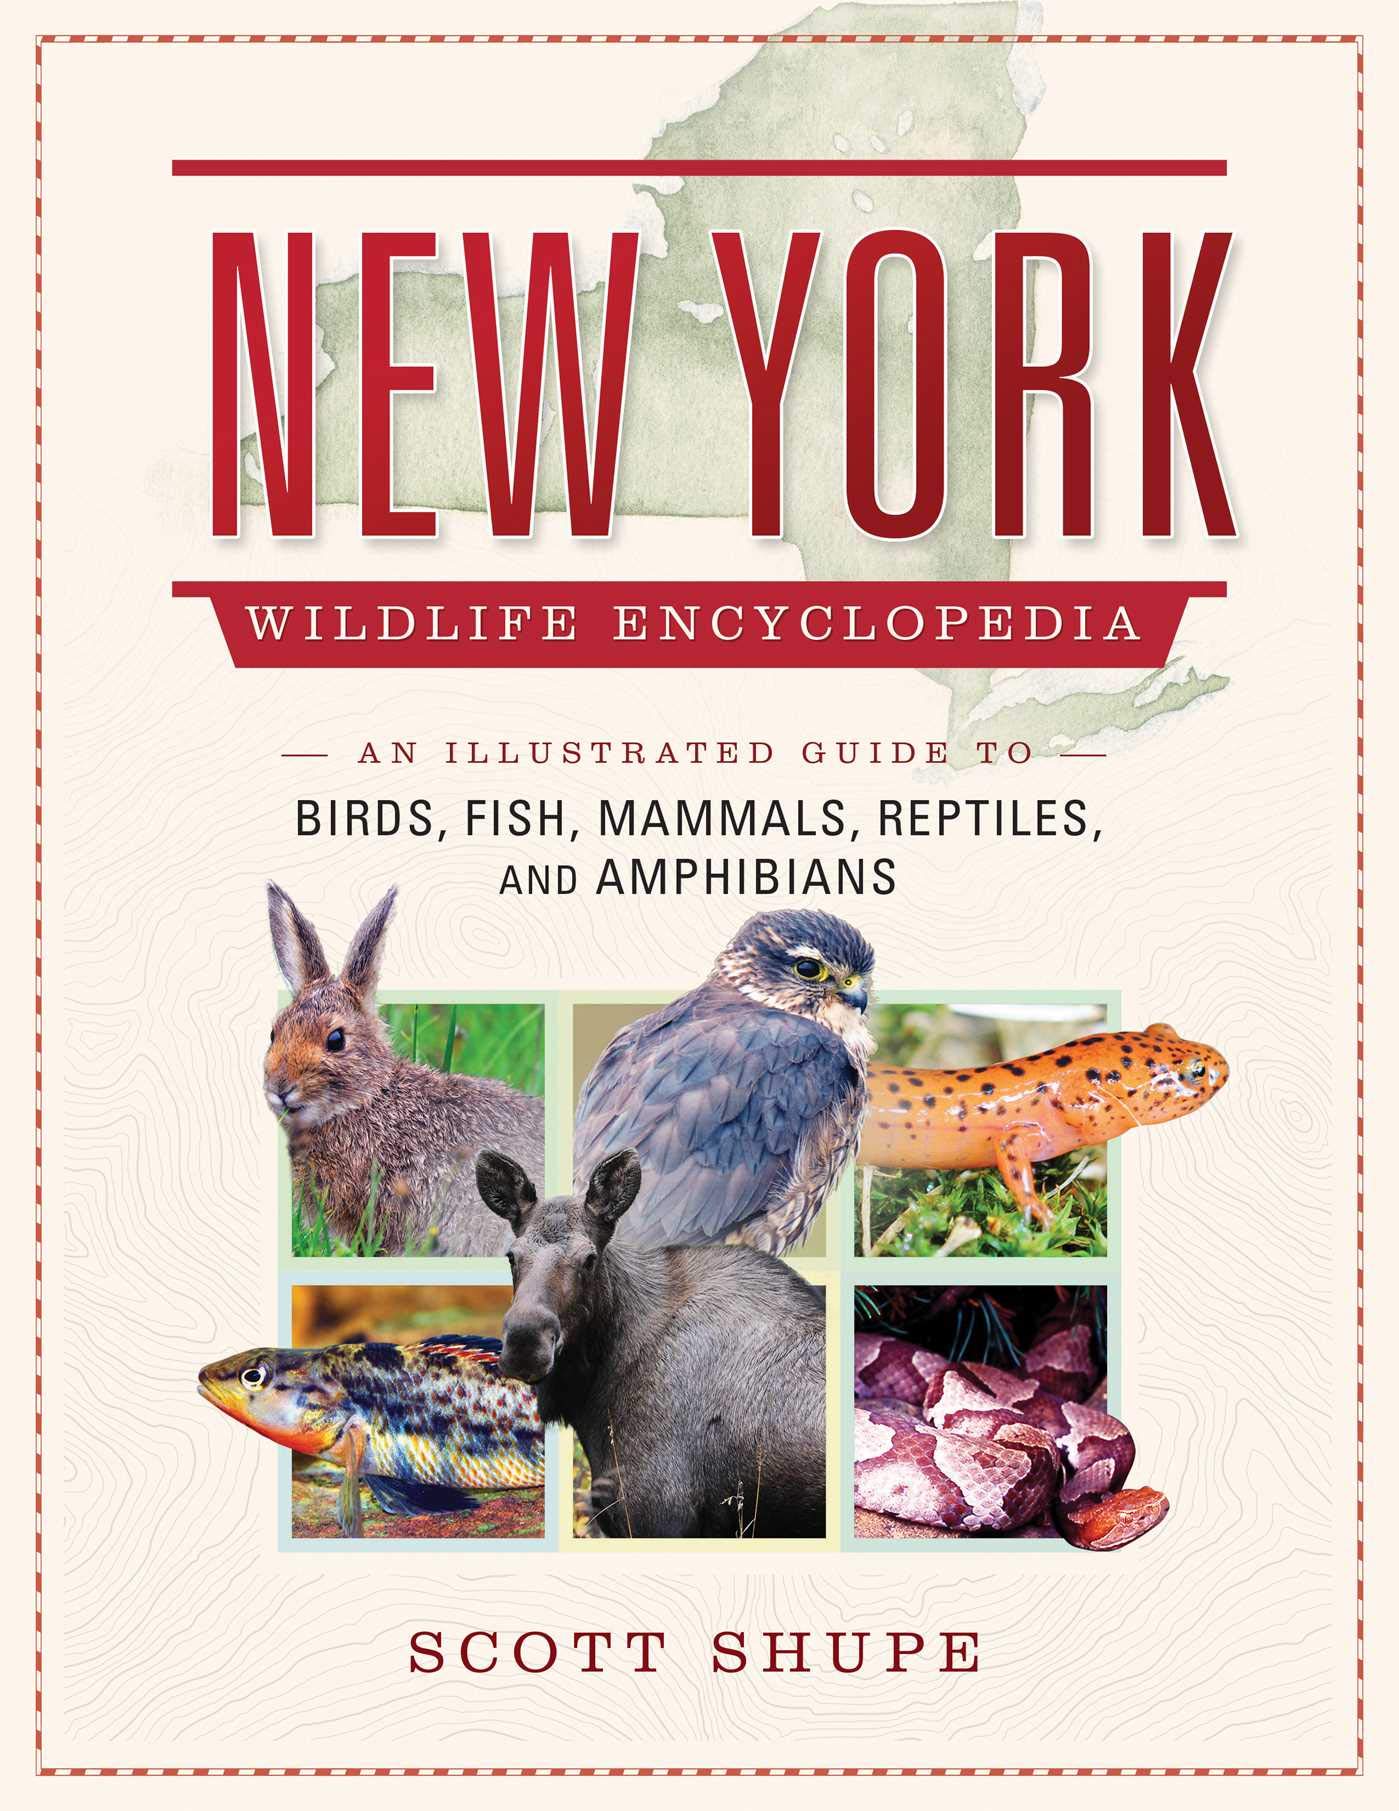 New York Wildlife Encyclopedia: An Illustrated Guide to Birds, Fish, Mammals, Reptiles, and Amphibians